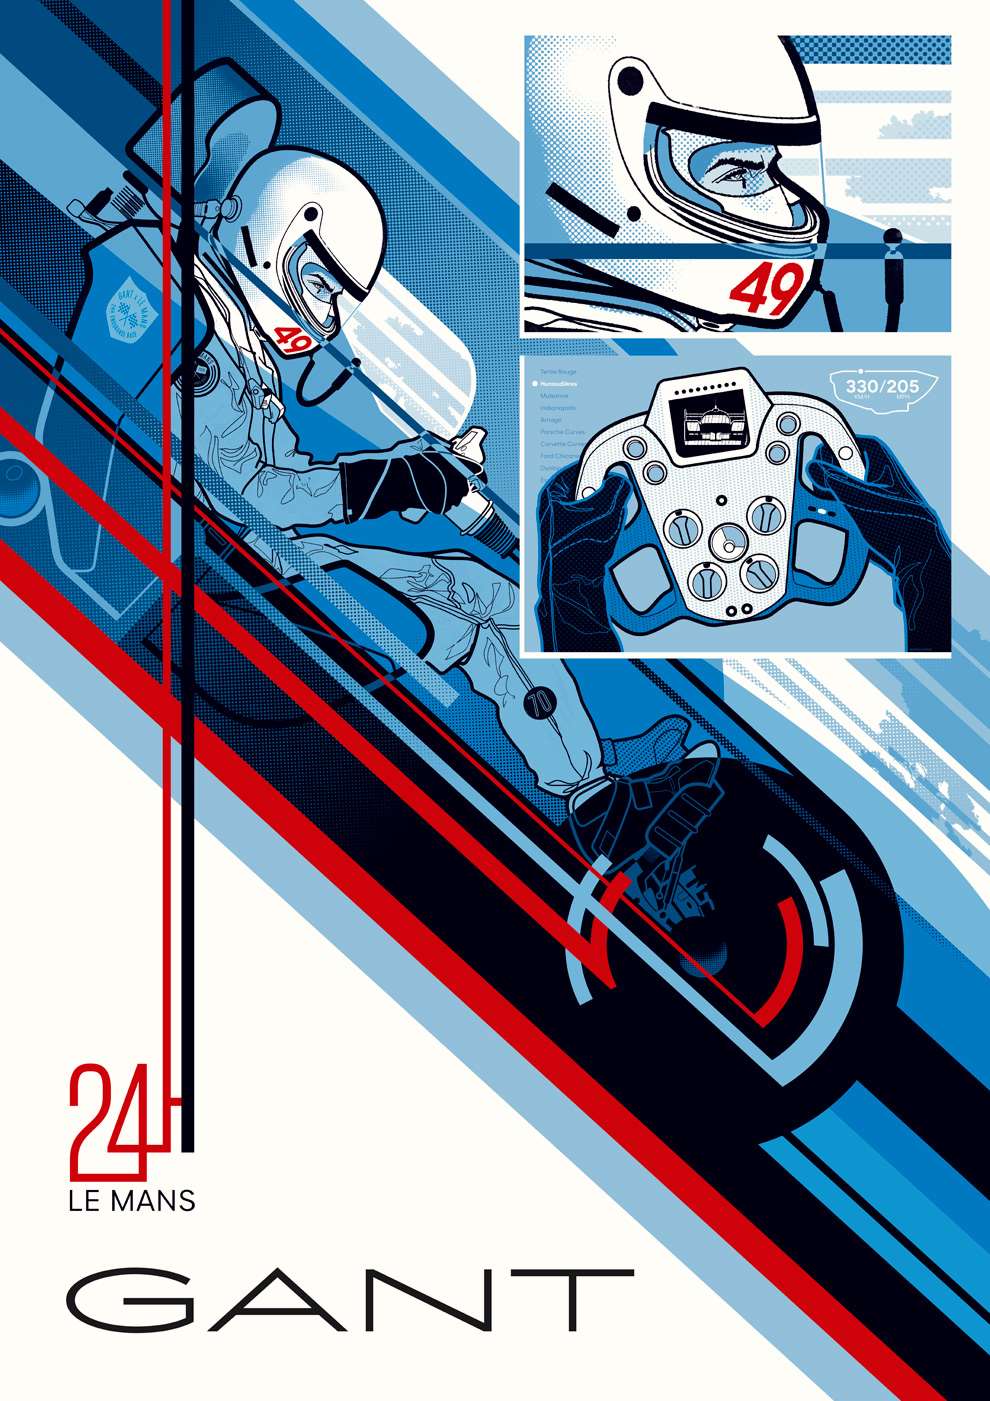 Jonas Bergstrand, Retro illustration of racing car for the 24H of le mans, gant campaign 